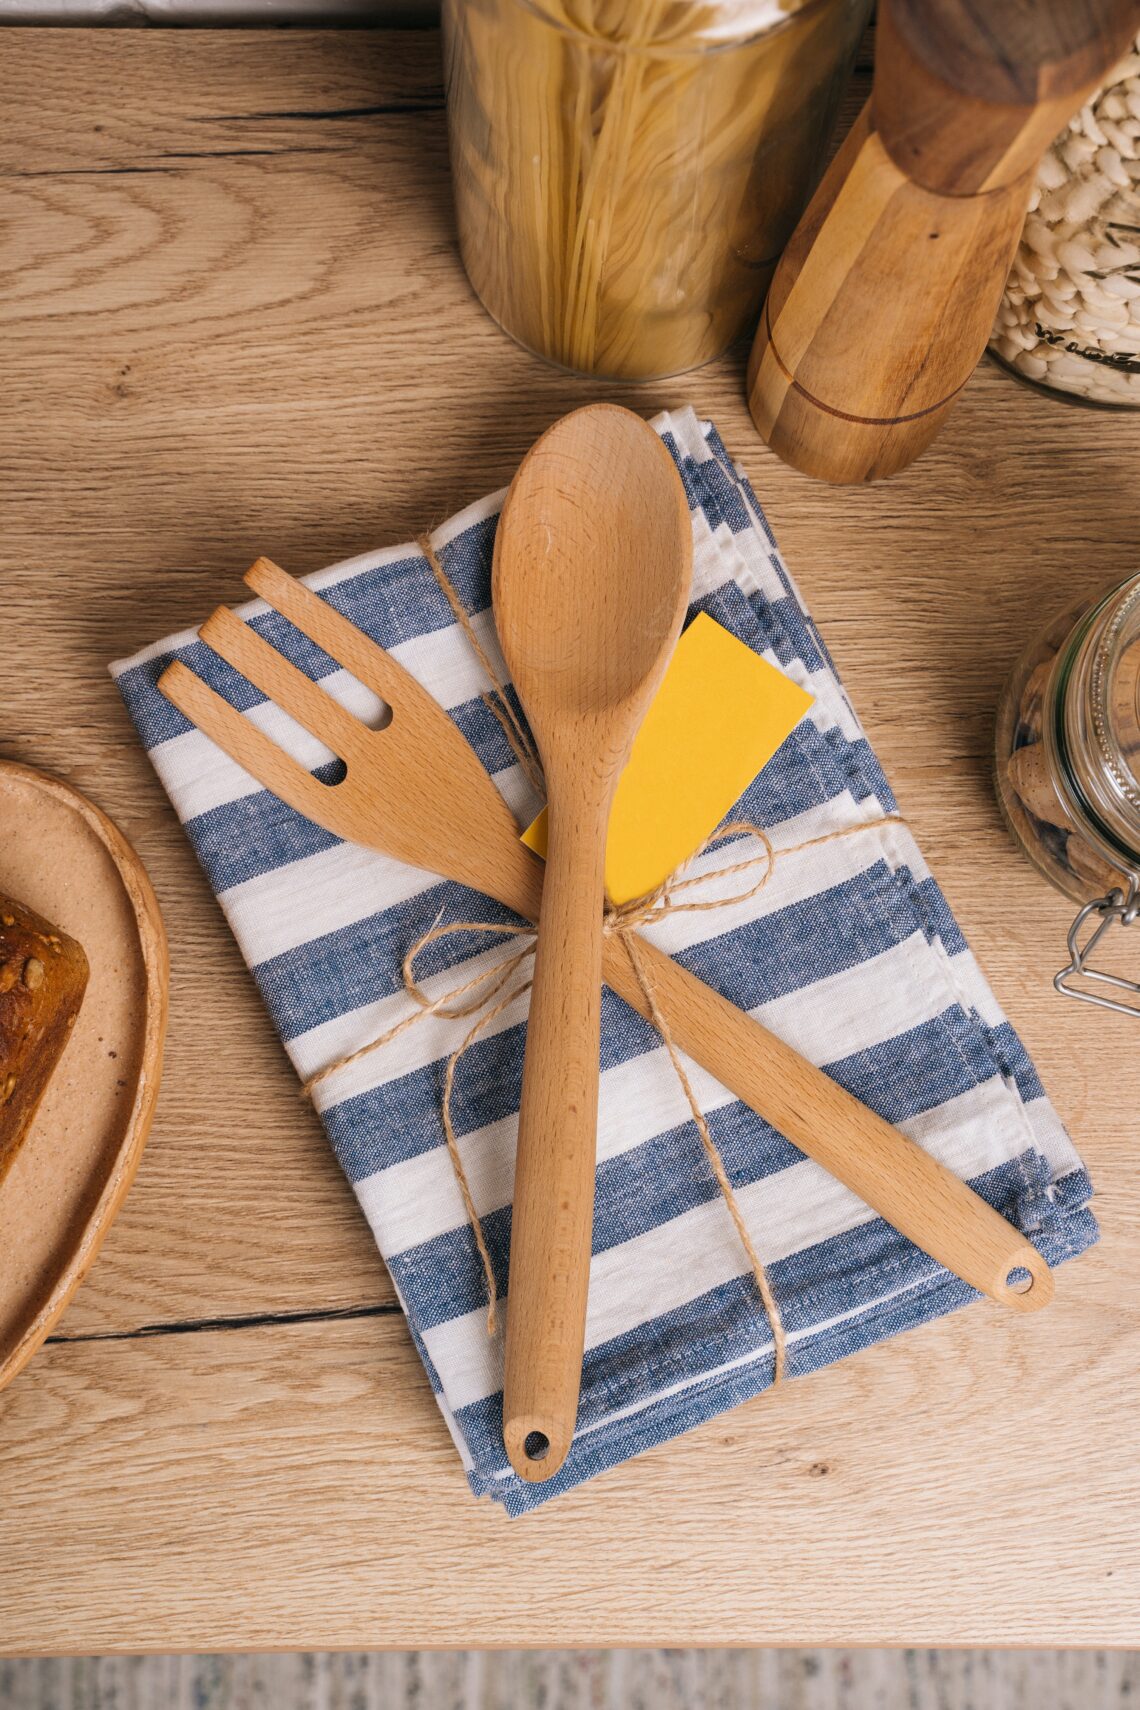 Photo by Tima Miroshnichenko: https://www.pexels.com/photo/brown-wooden-spoon-and-fork-on-blue-and-white-kitchen-towel-4805235/